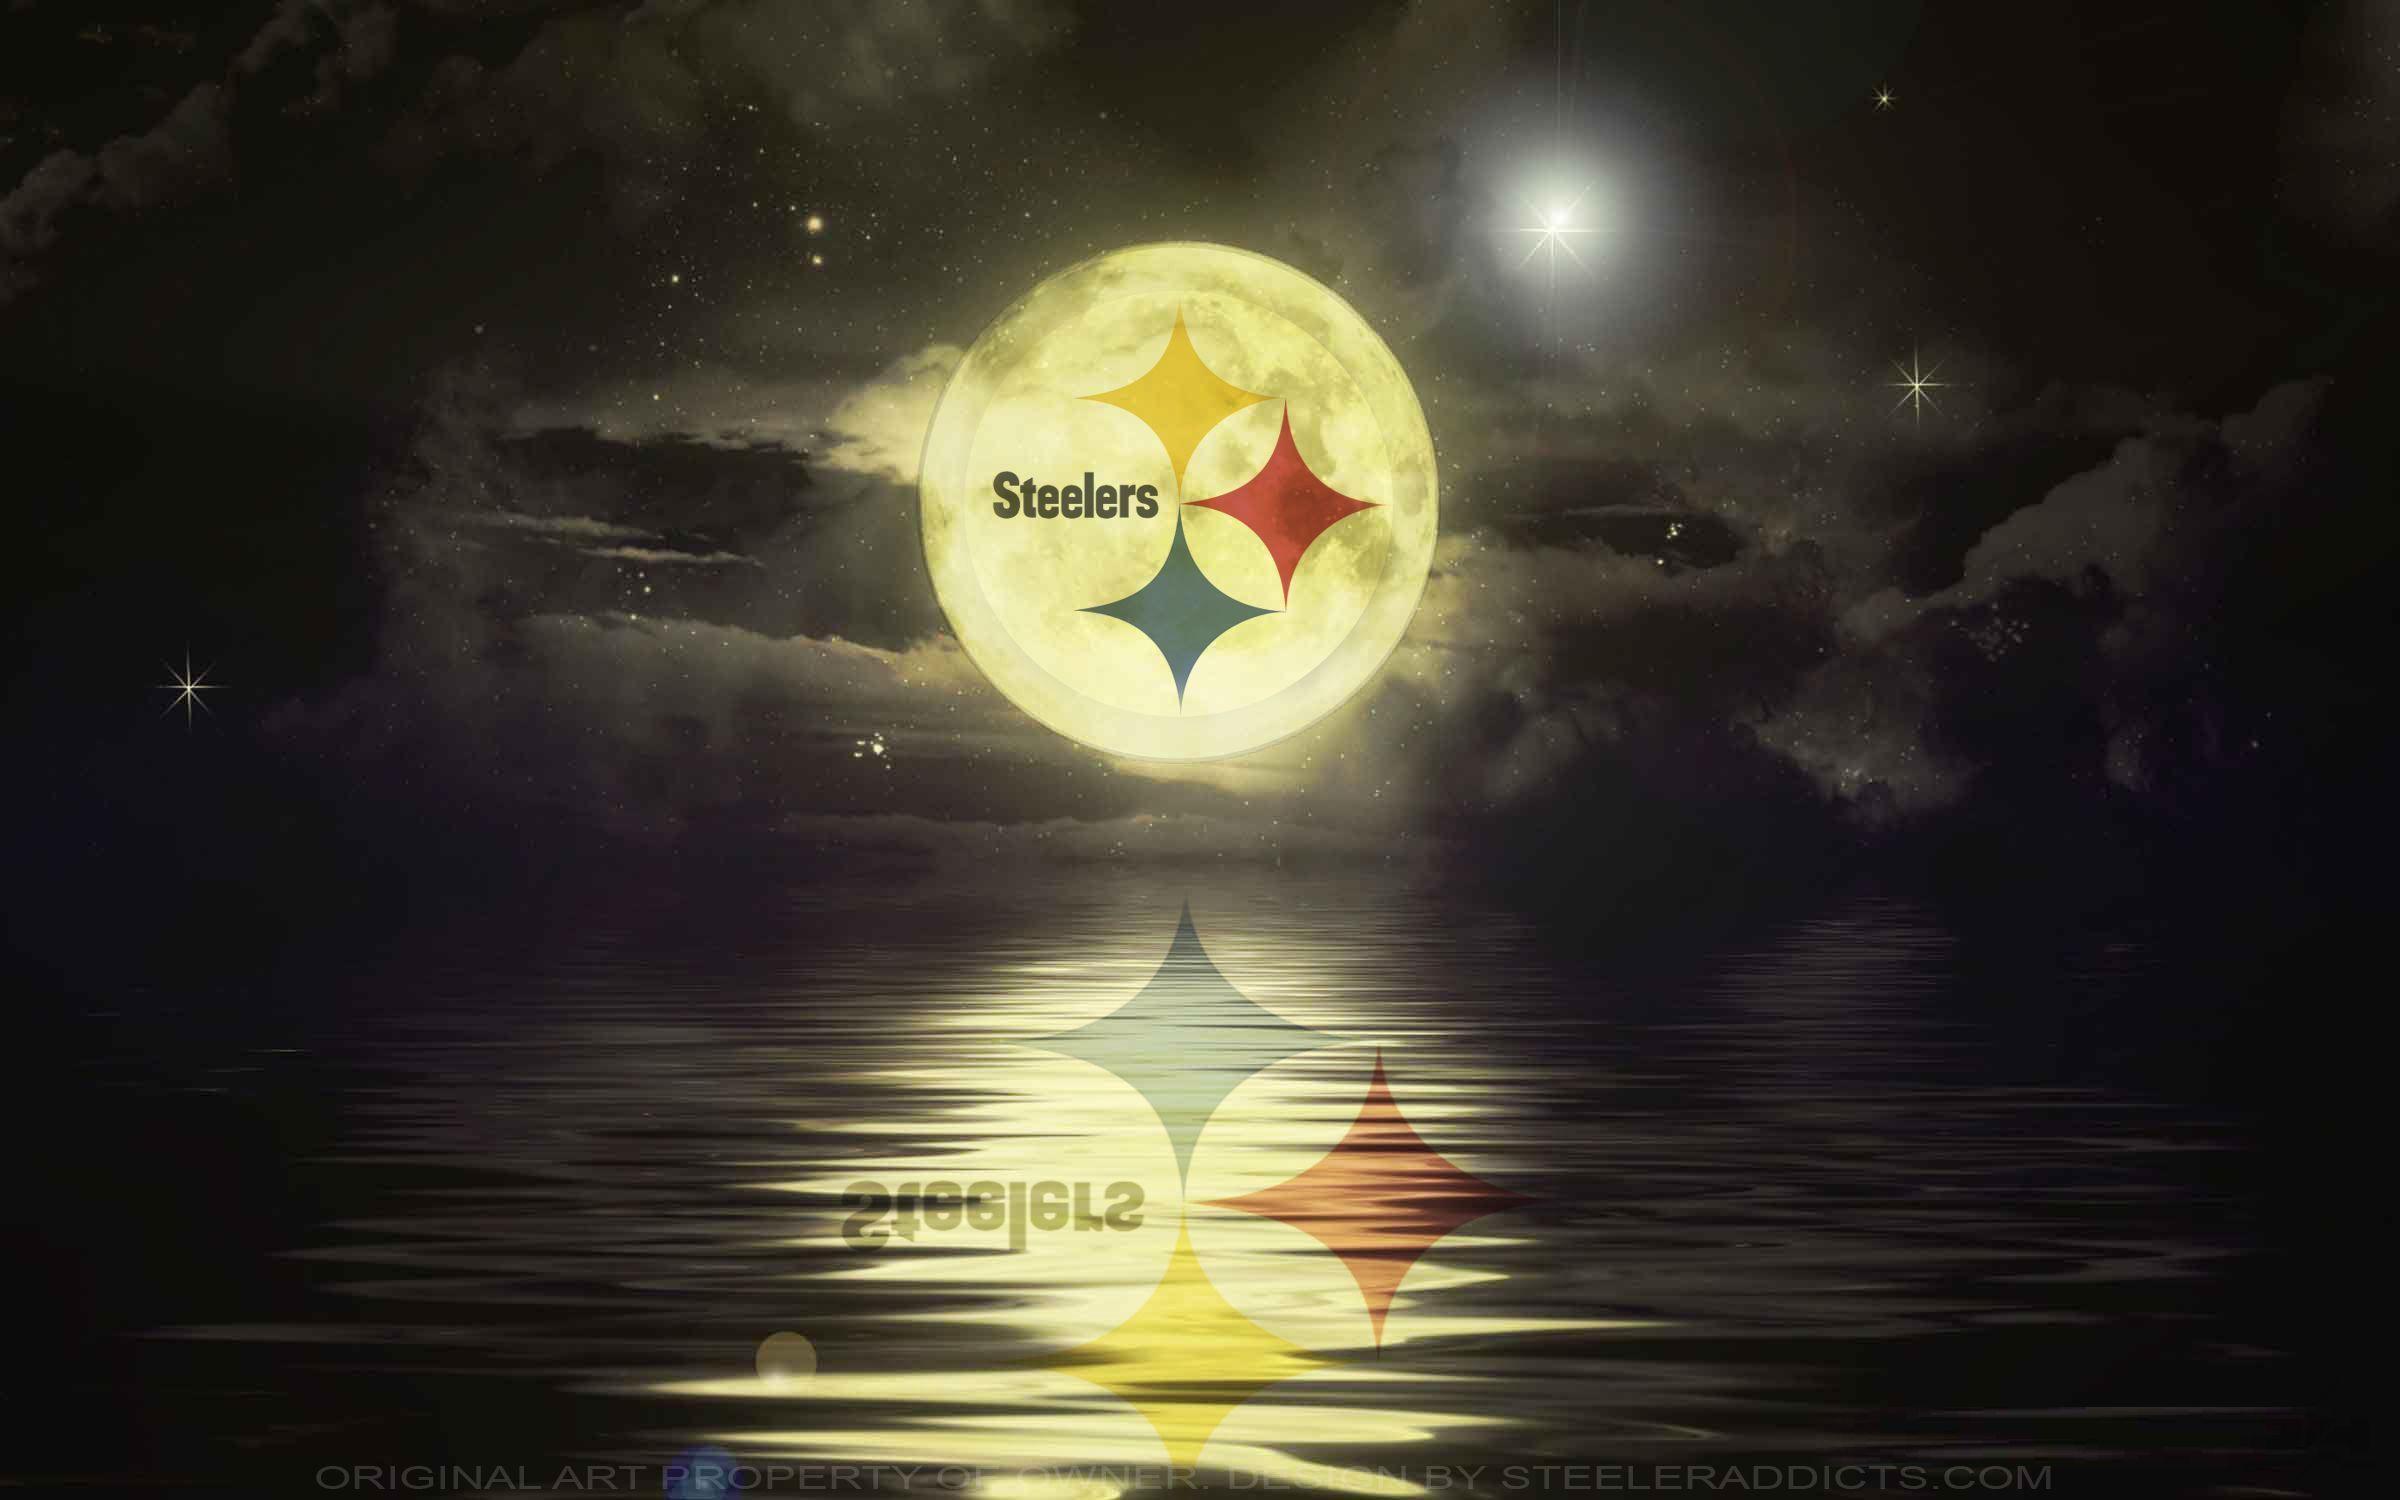 More Steelers Wallpaper Loaded Up 2400x1500PX Wallpaper